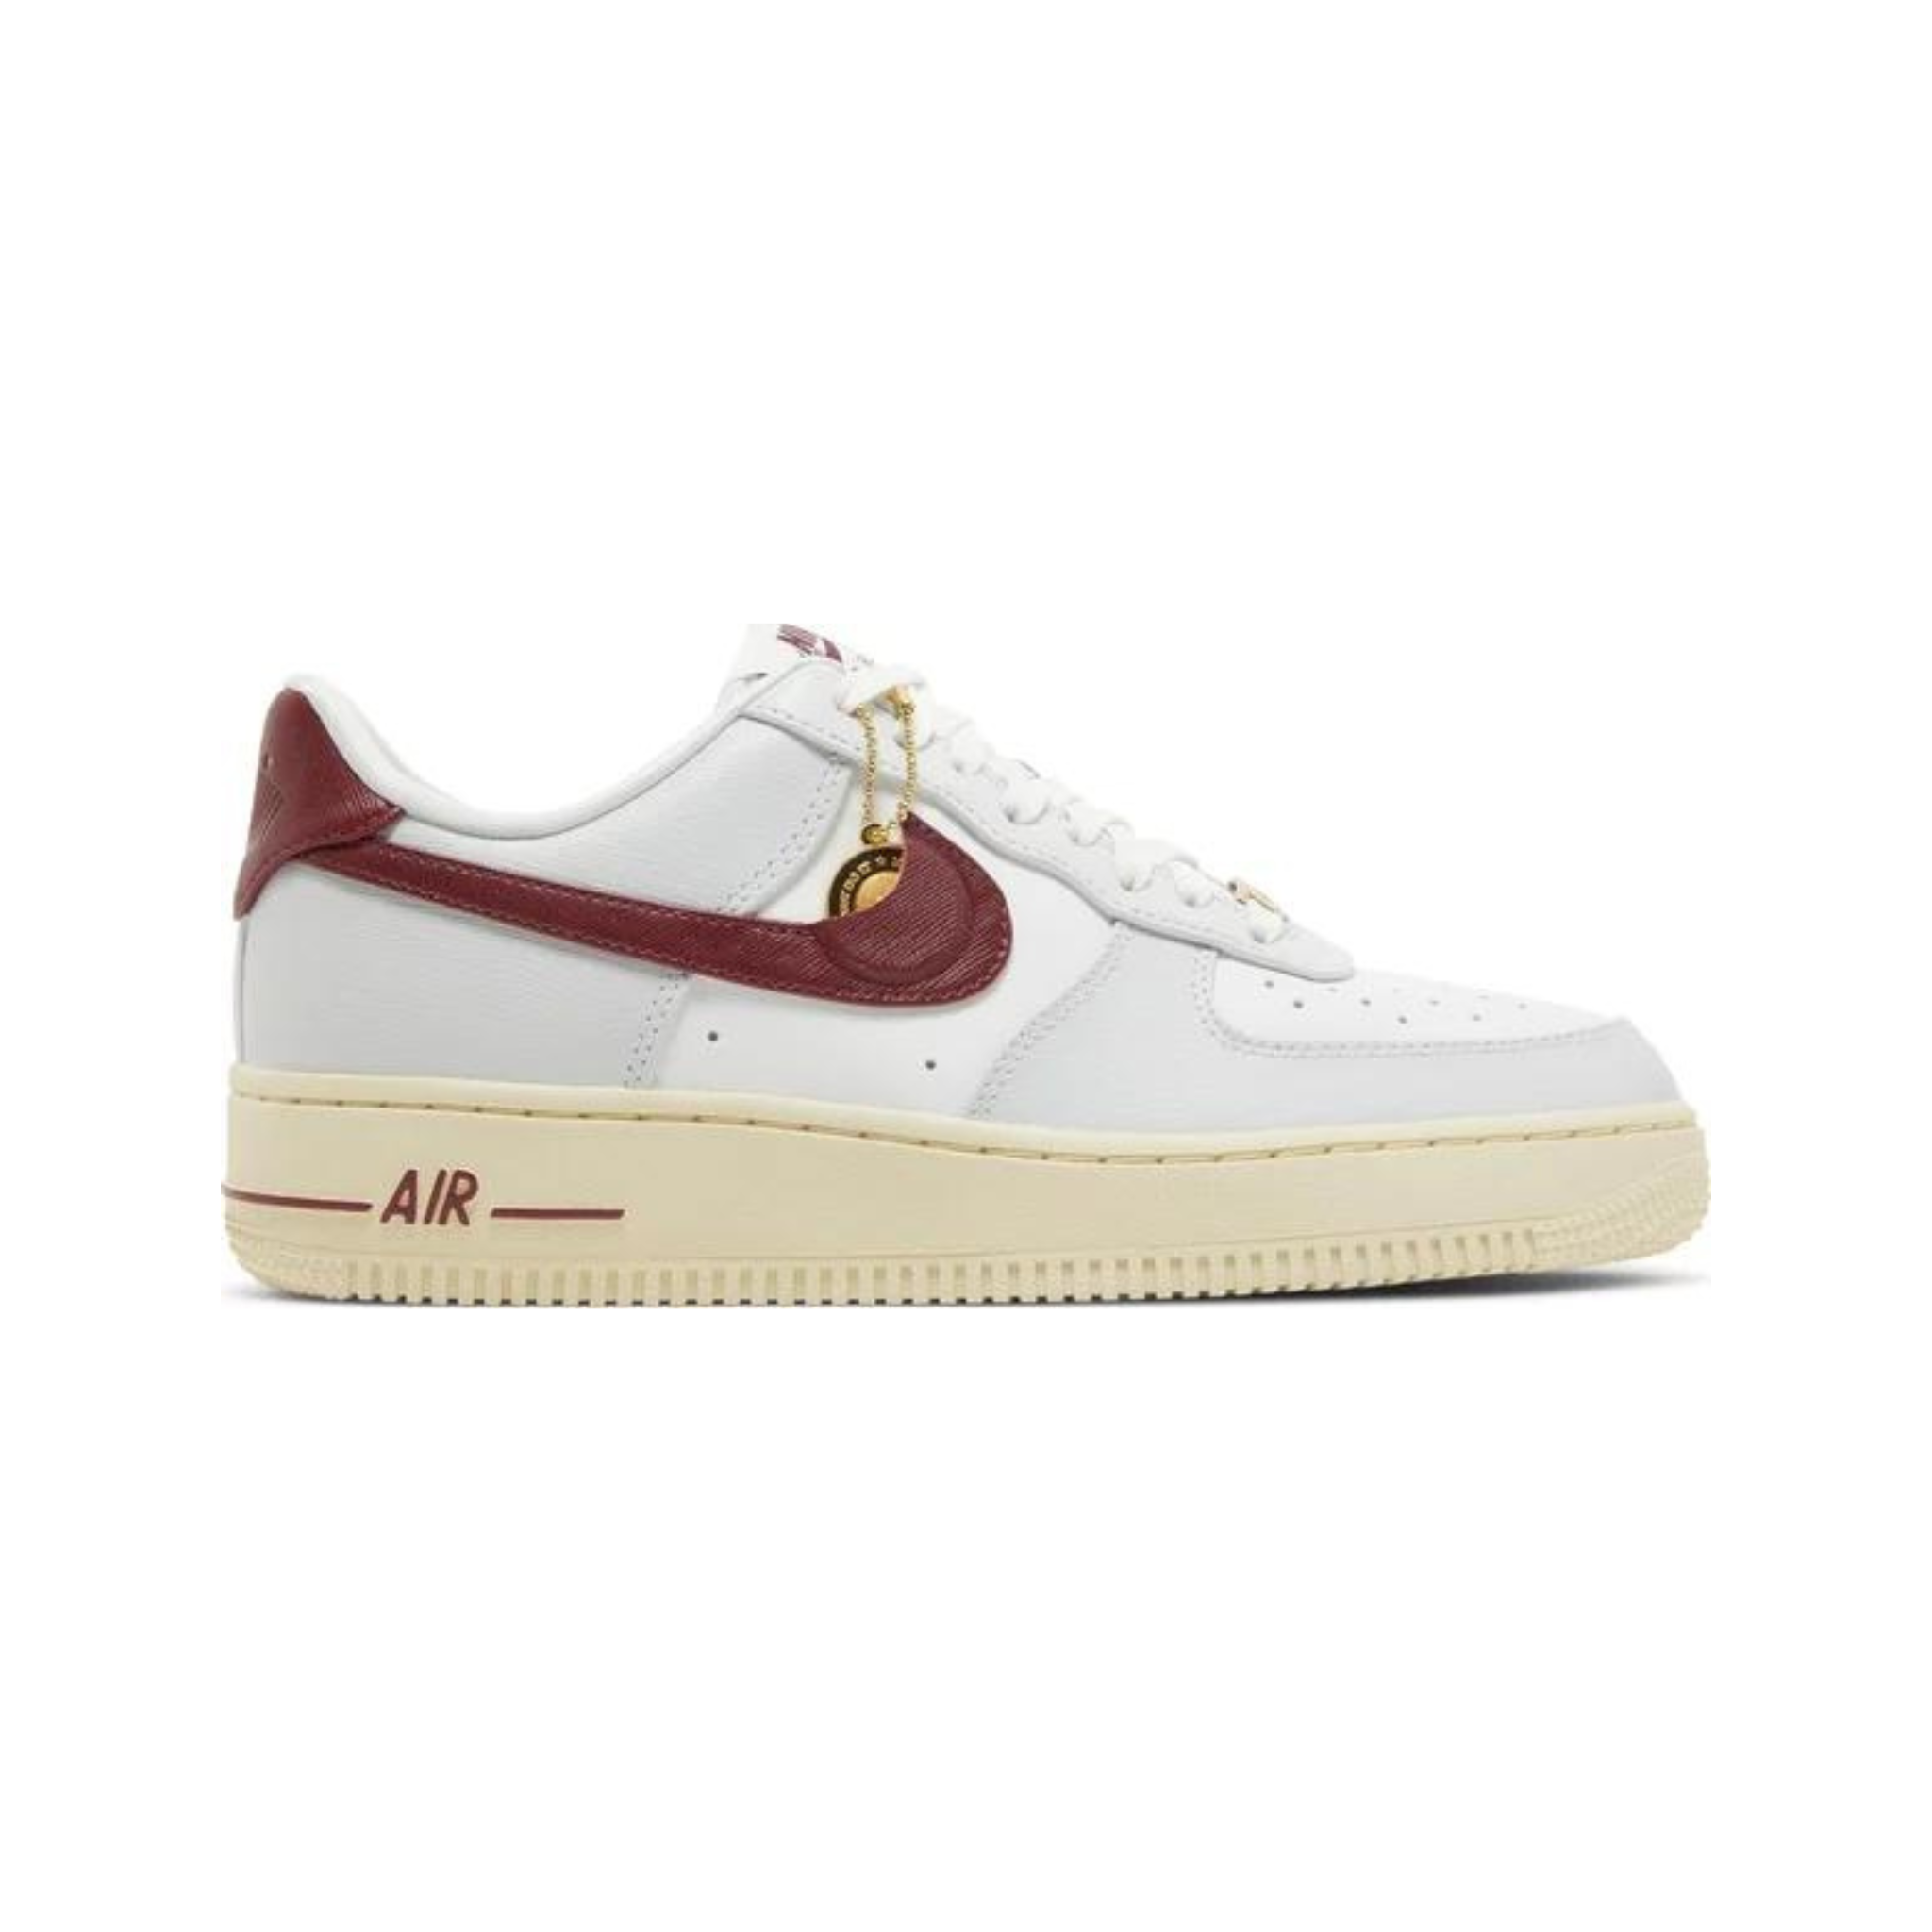 Nike Air Force 1 Low '07 SE Just Do It Photon Dust Team Red (Women's)